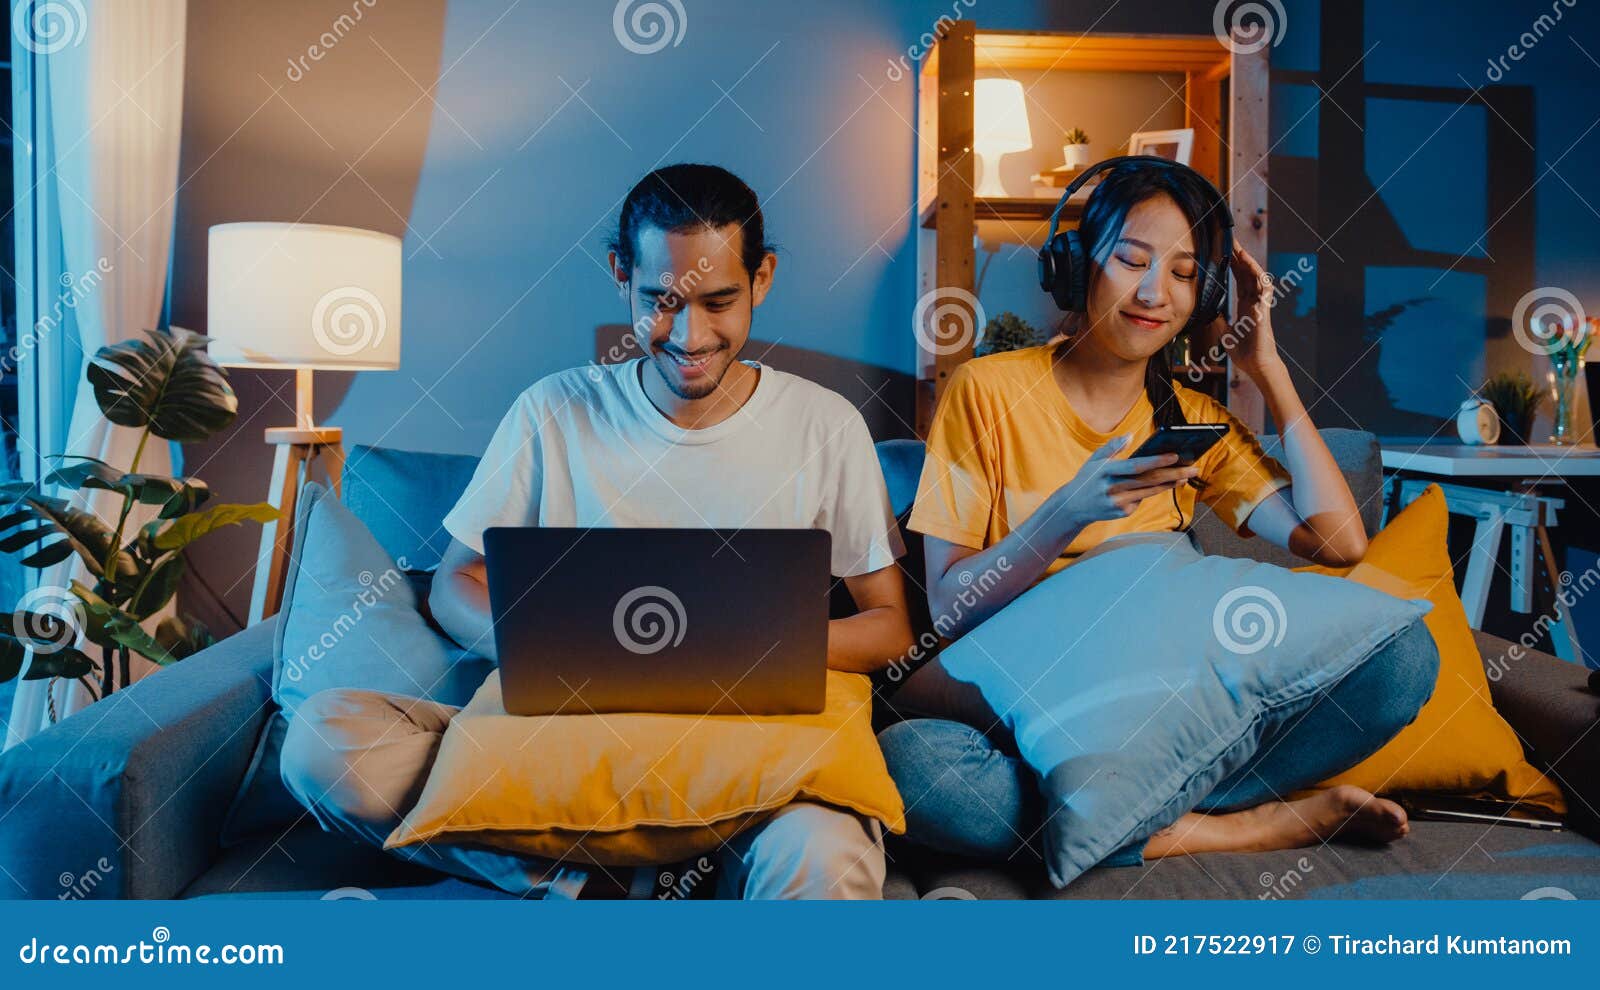 Freelance Asia Couple Man and Woman in Casual Hasband Work